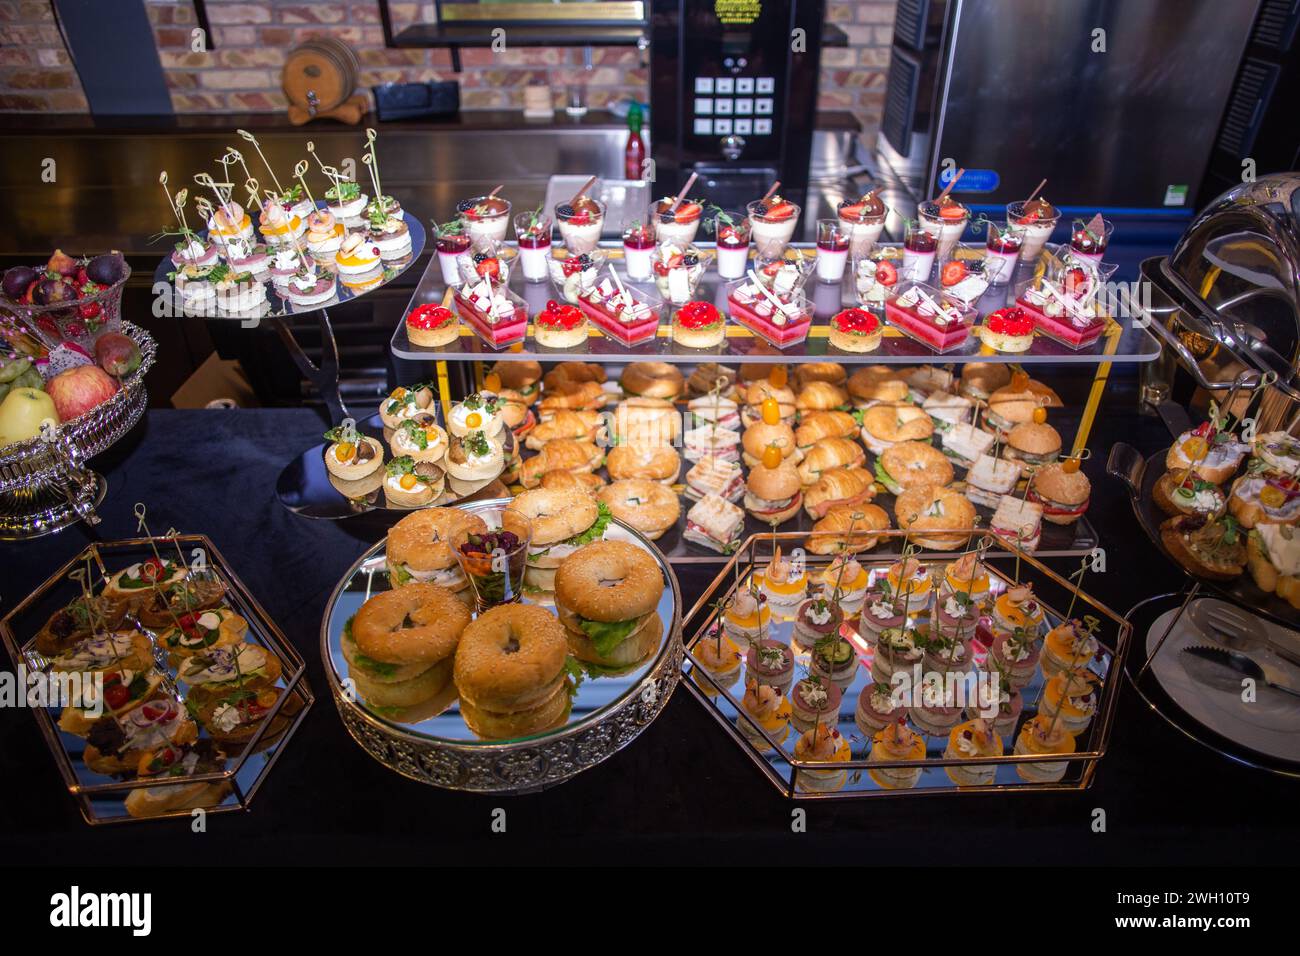 A beautifully presented catering buffet with an array of tempting snacks and desserts. Includes sandwiches, mini burgers, pastries, and fruit, elegant Stock Photo